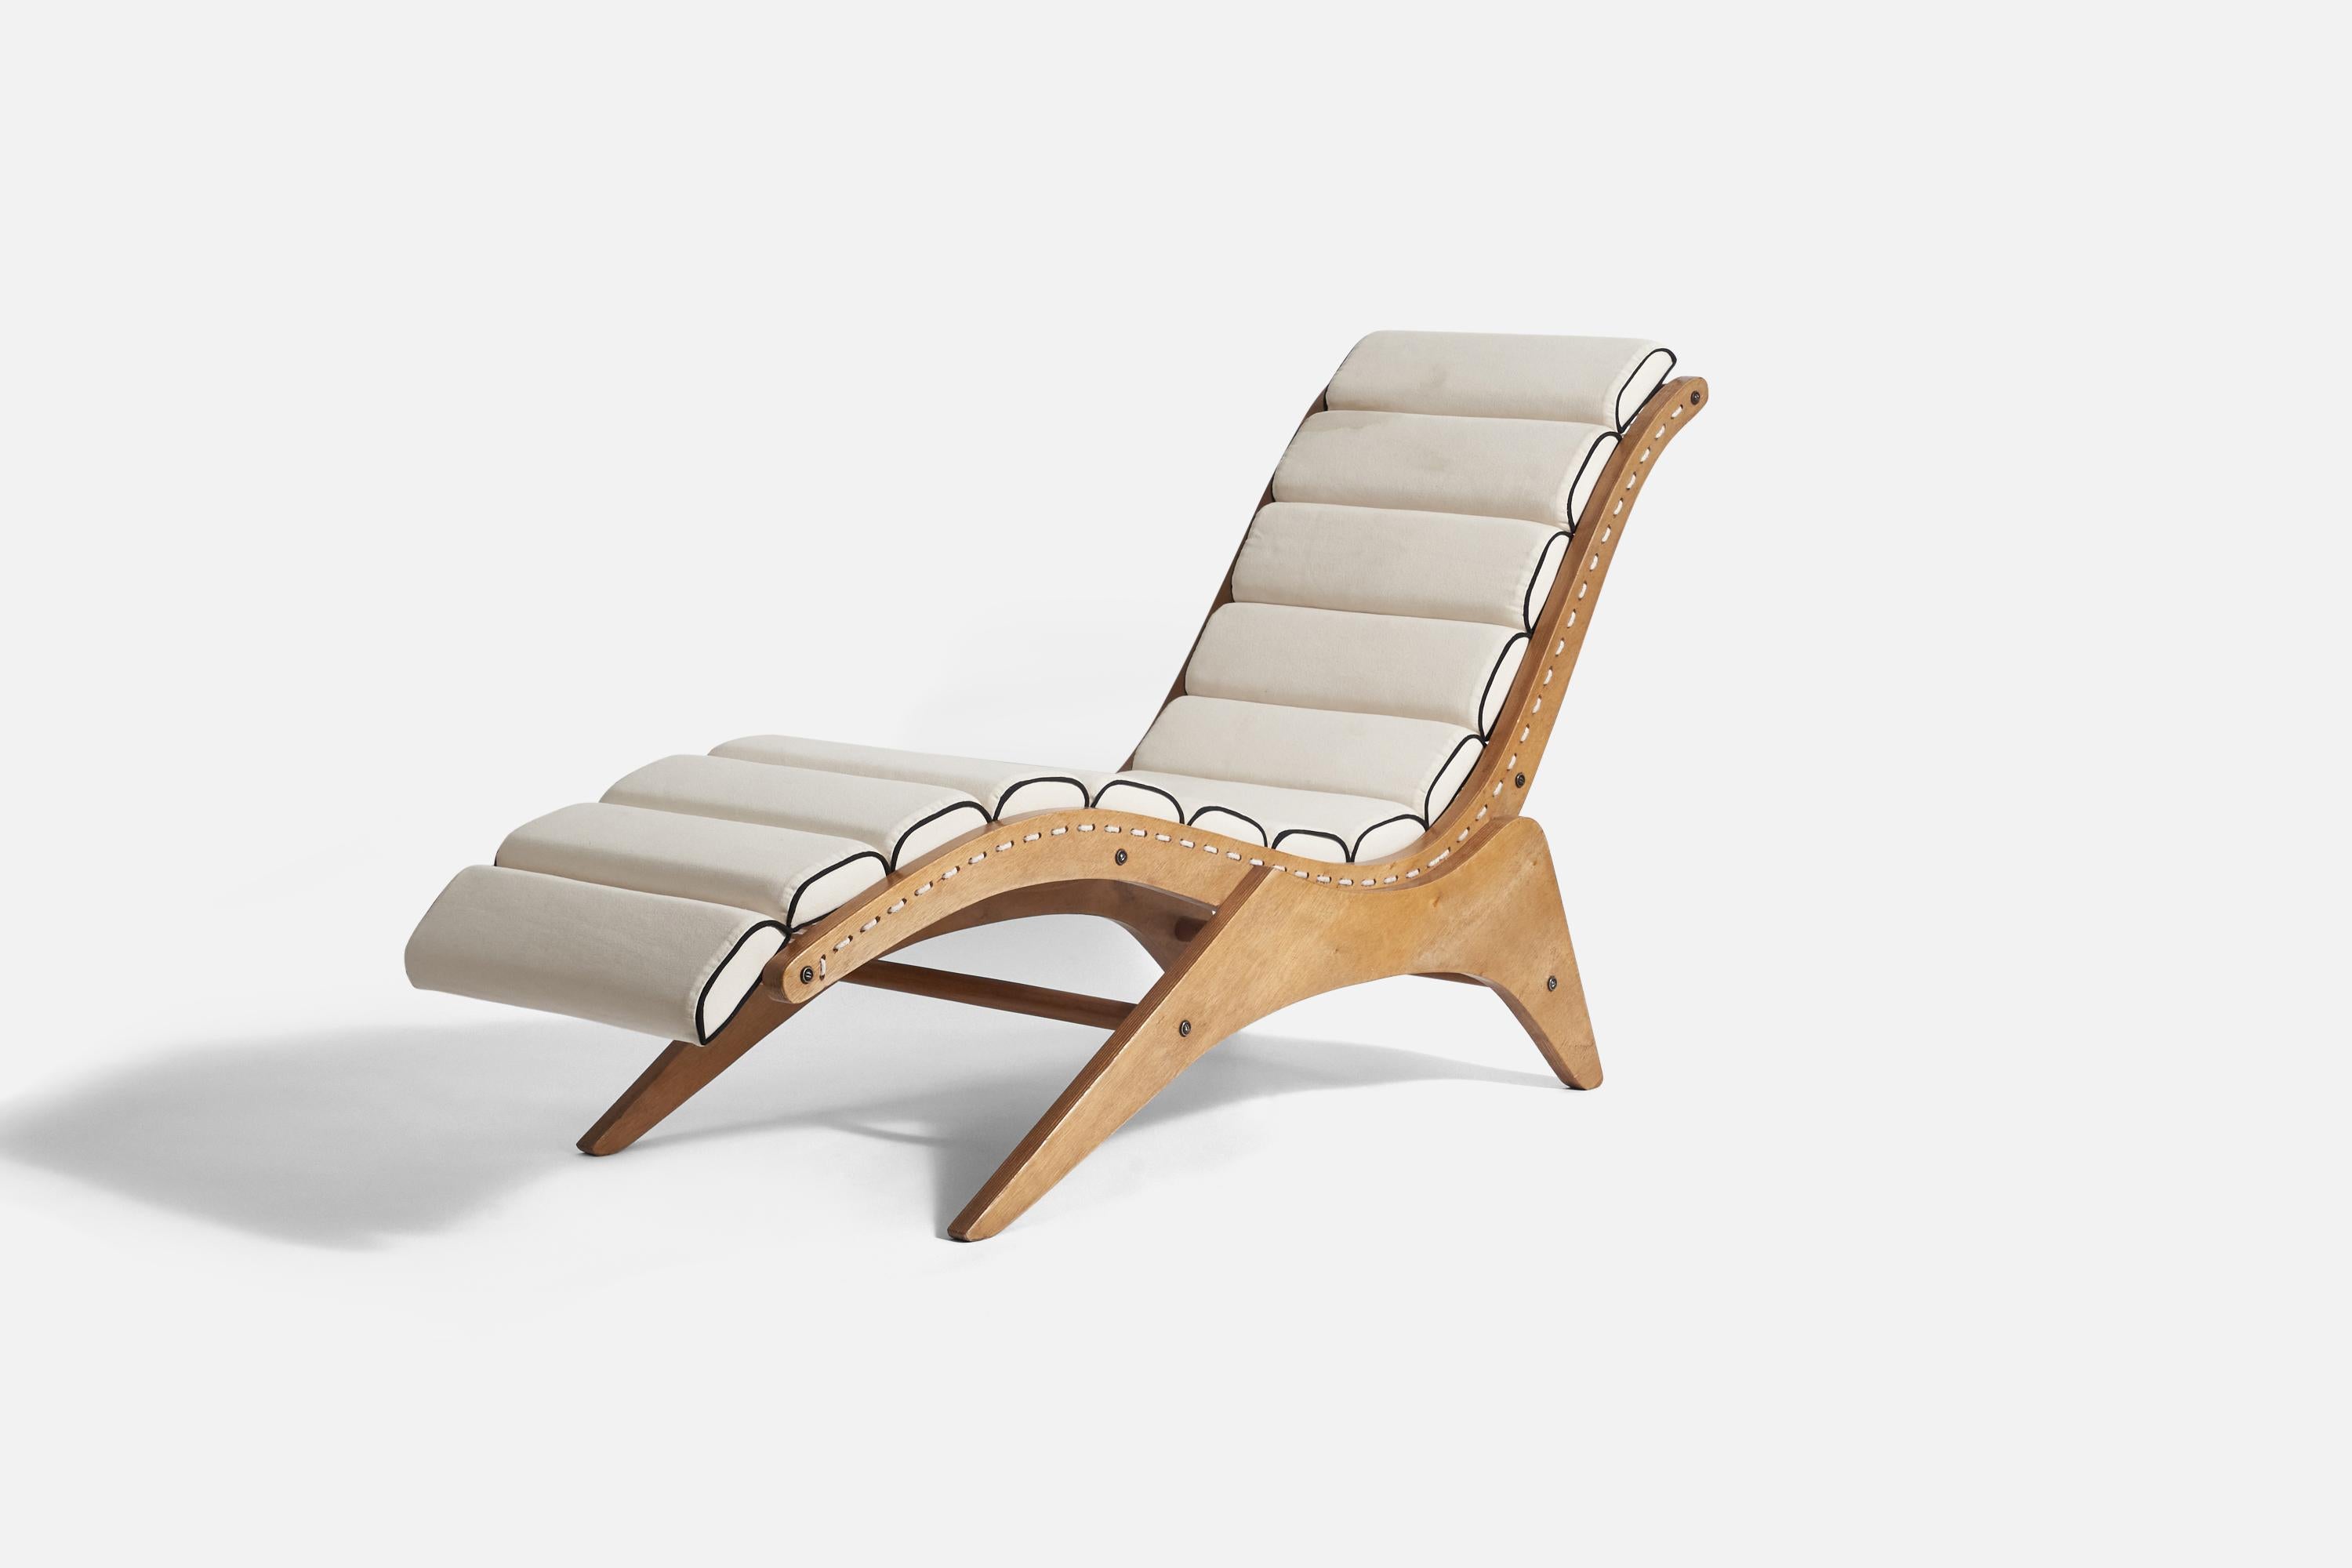 A chaise longue designed by José Zanine Caldas for Mòveis Artísticos Z, Brazil, in 1949. It features marina plywood, cord, and fabric. 

Present example was exhibited in Galería Millan, in exhibition 